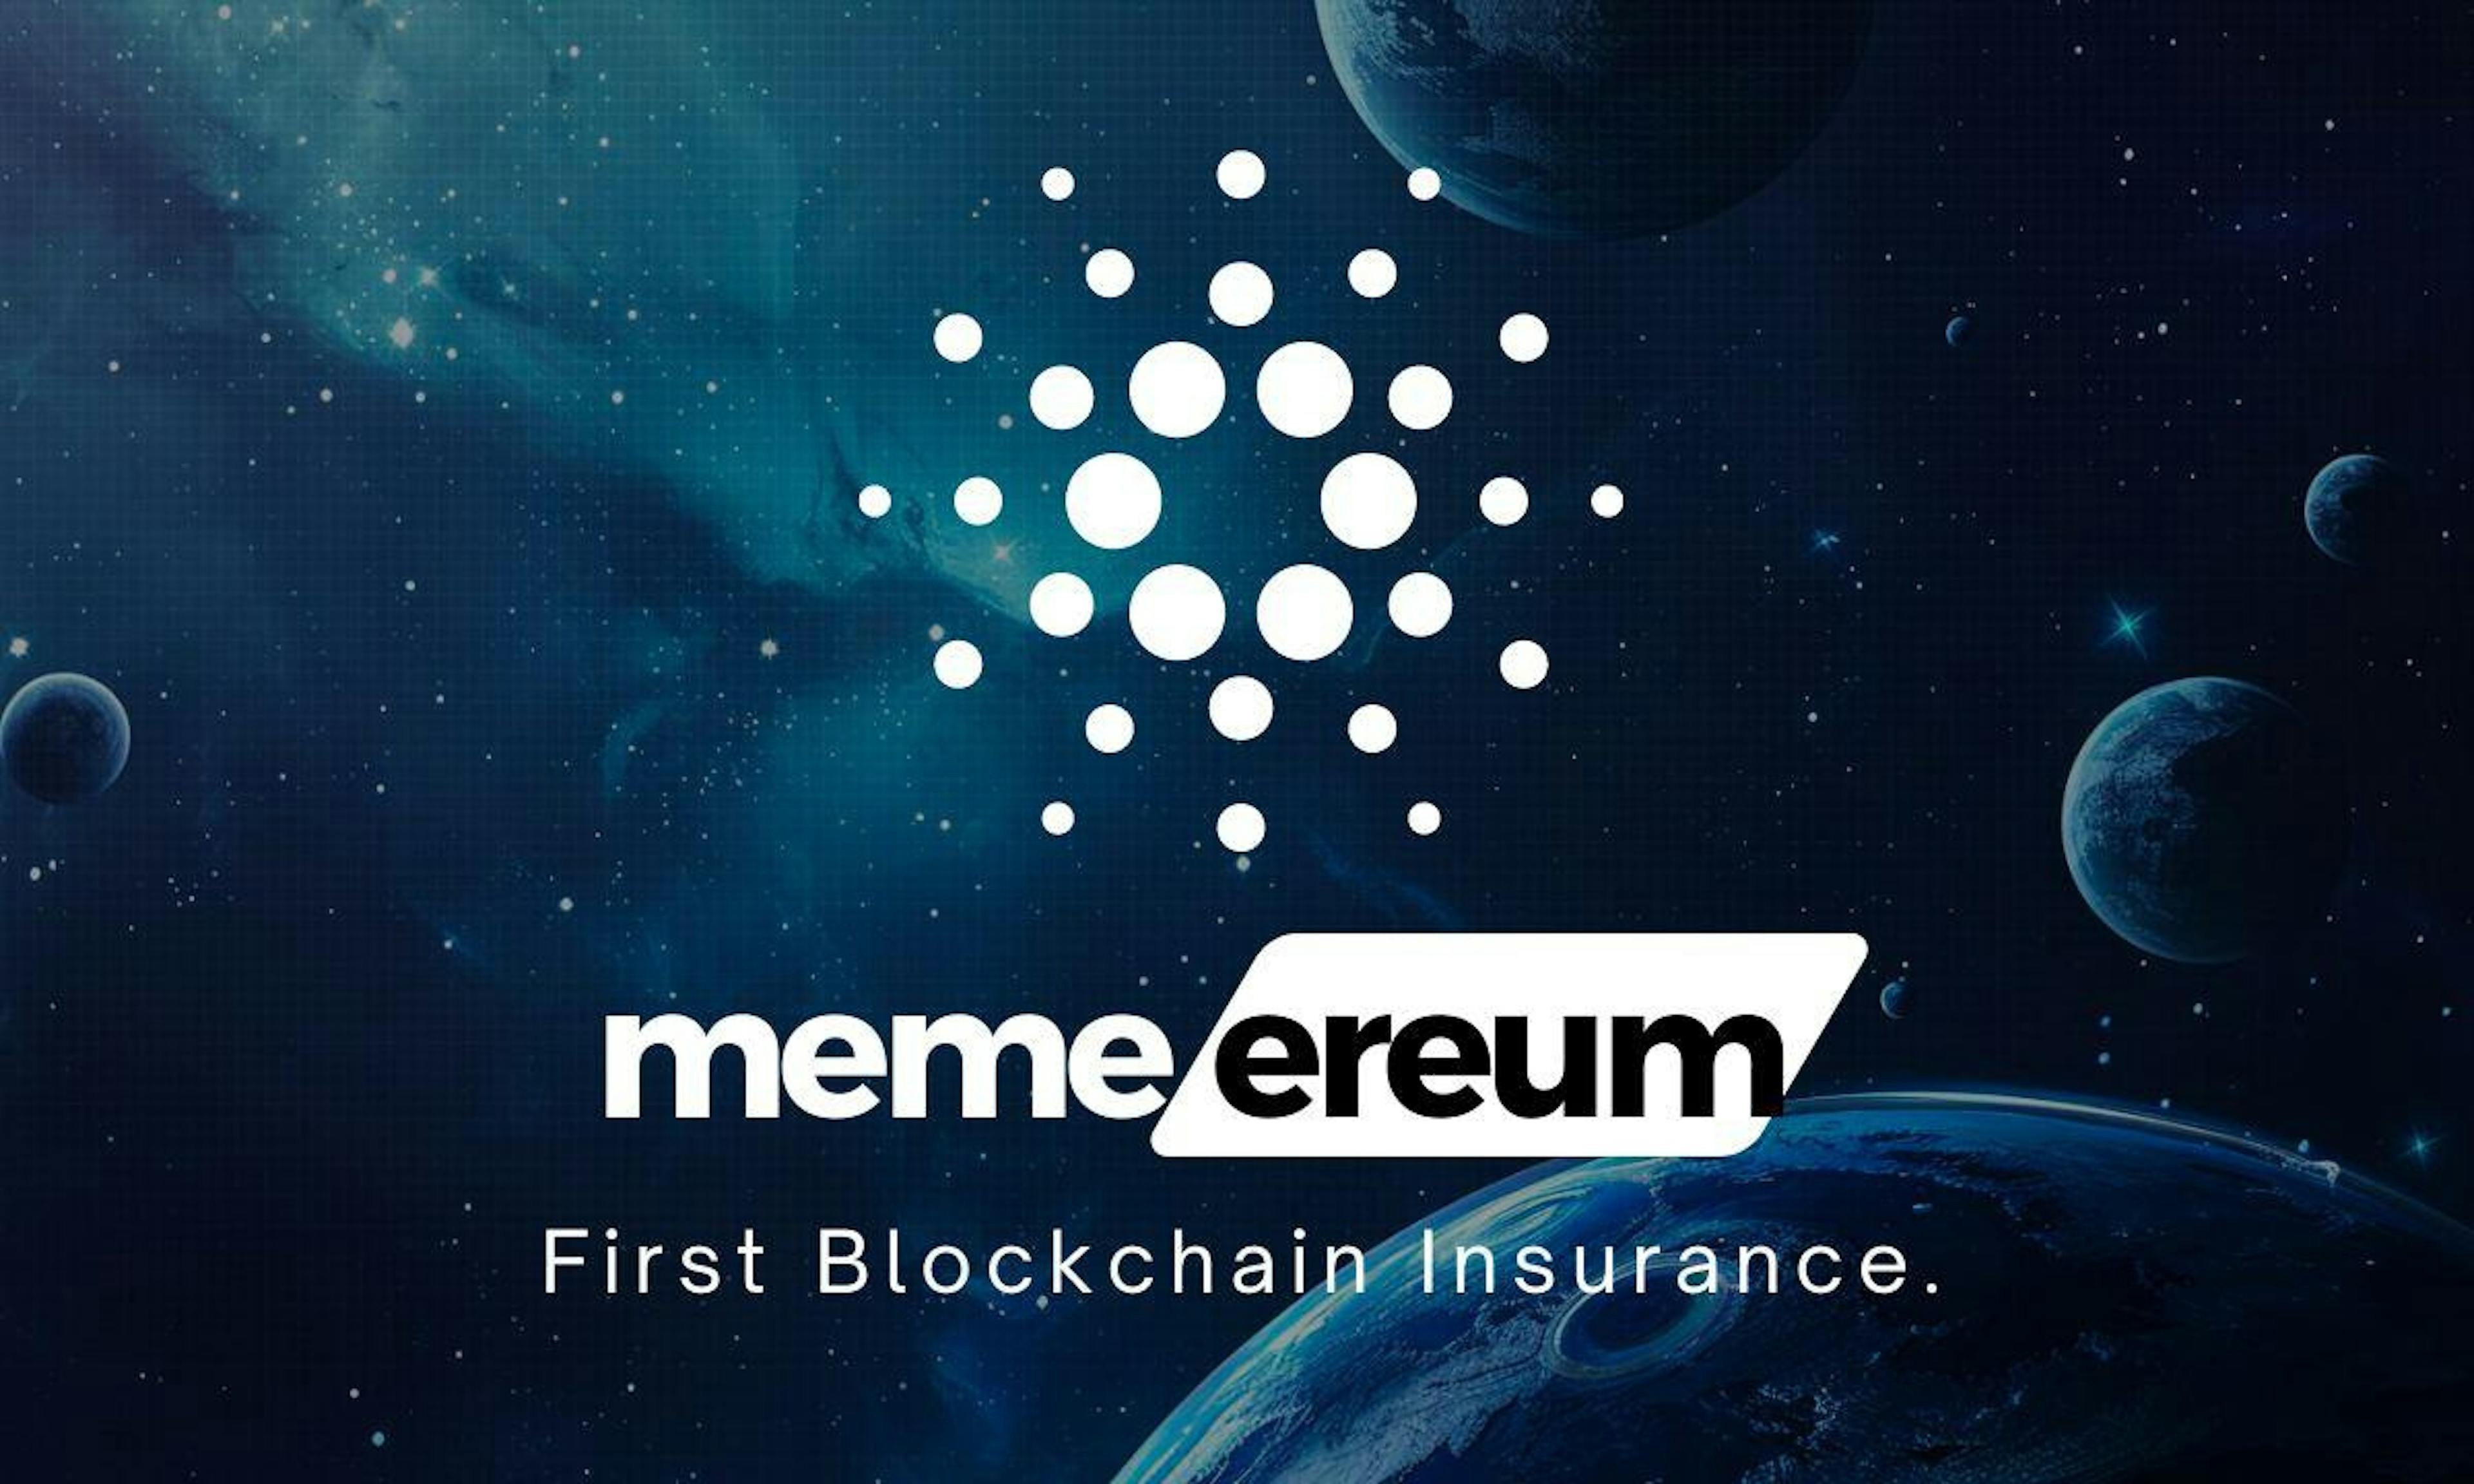 featured image - Memereum Sells Over 1M Tokens Within Hours On Presale While Markets Rebound